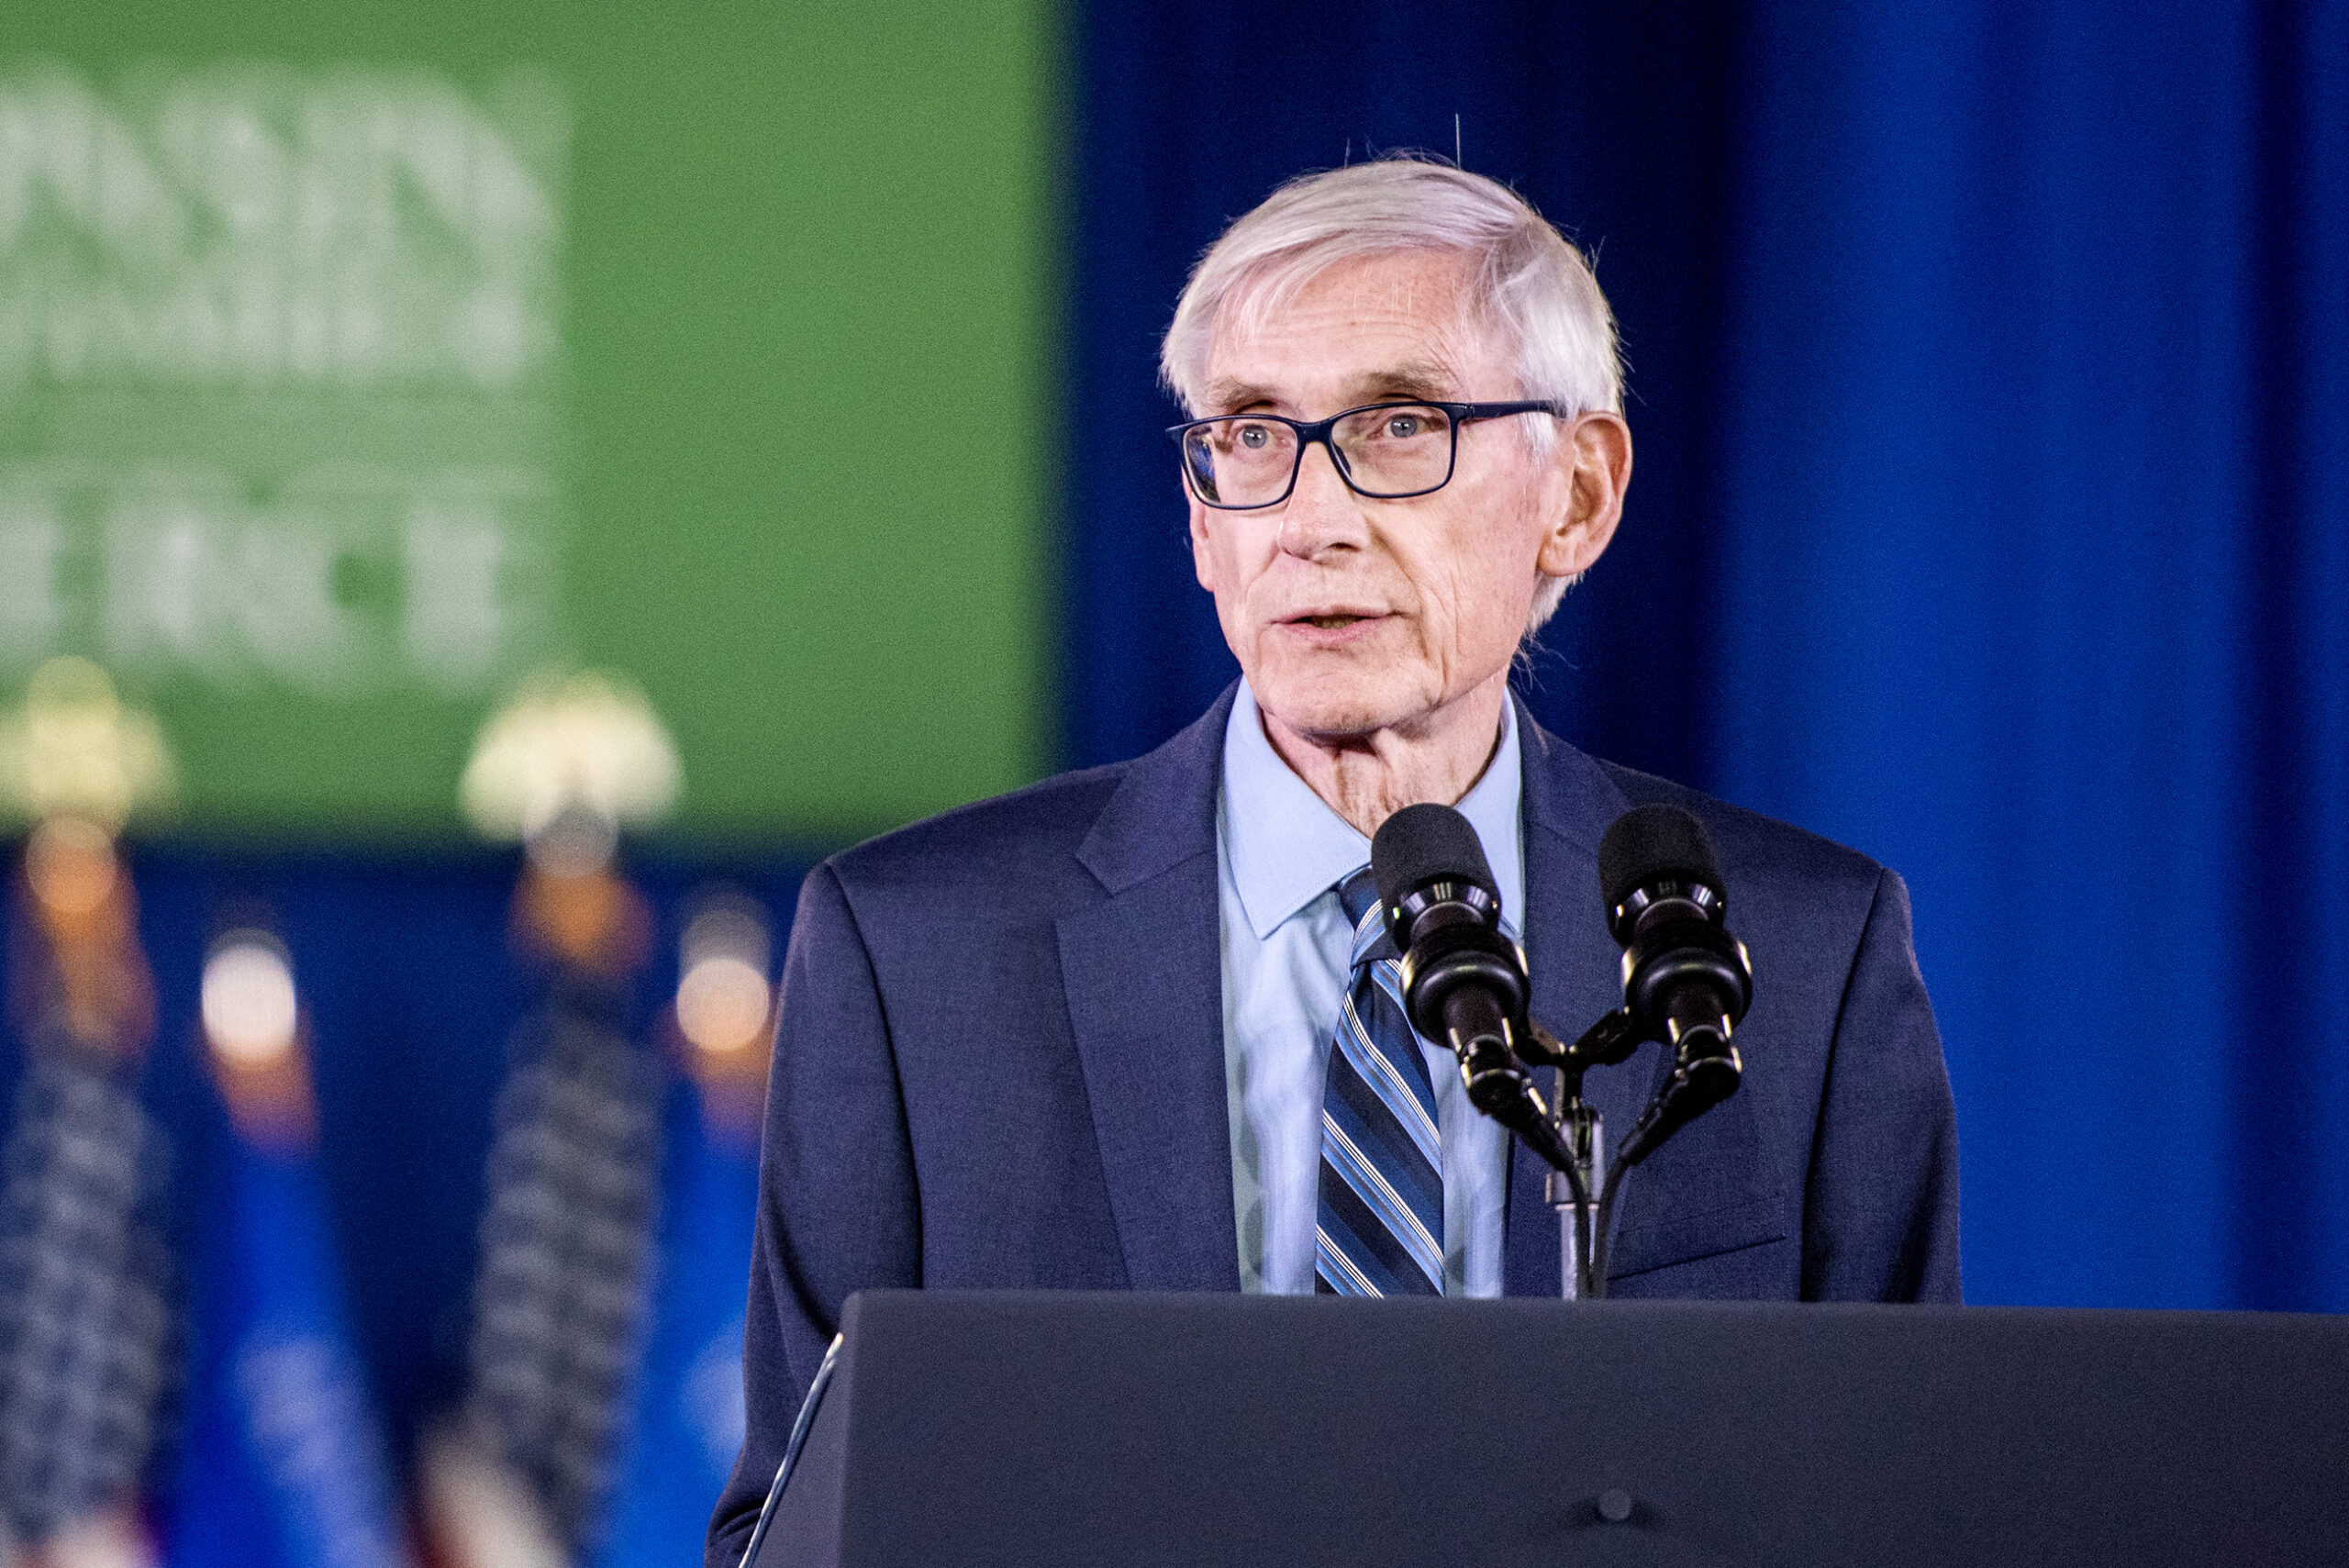 Evers speaks at a podium.